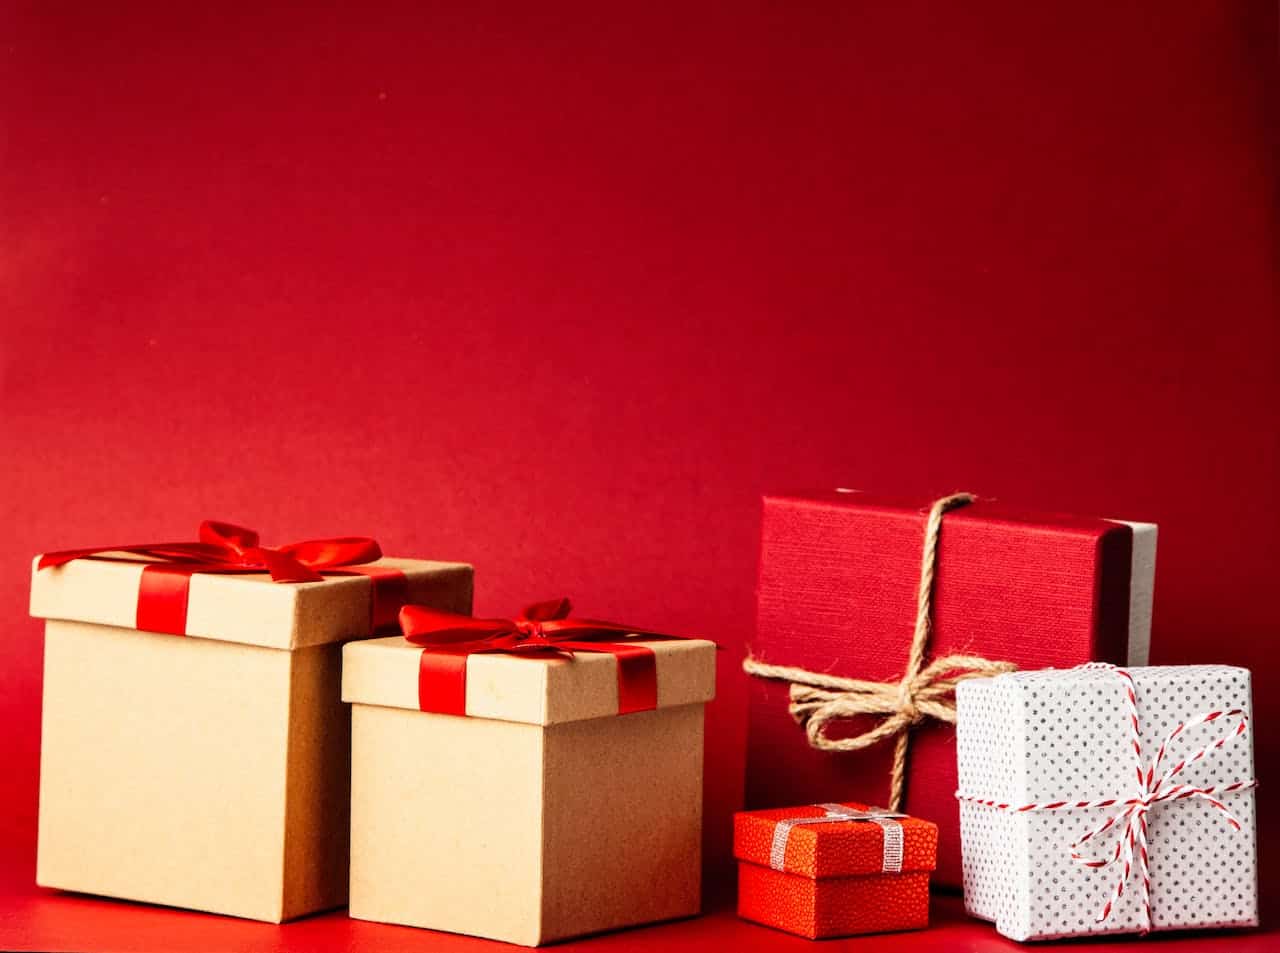 spotcovery-gift-boxes-placed-side-by-side-boxing-day-origin-how-the-public-day-after-christmas-got-its-name